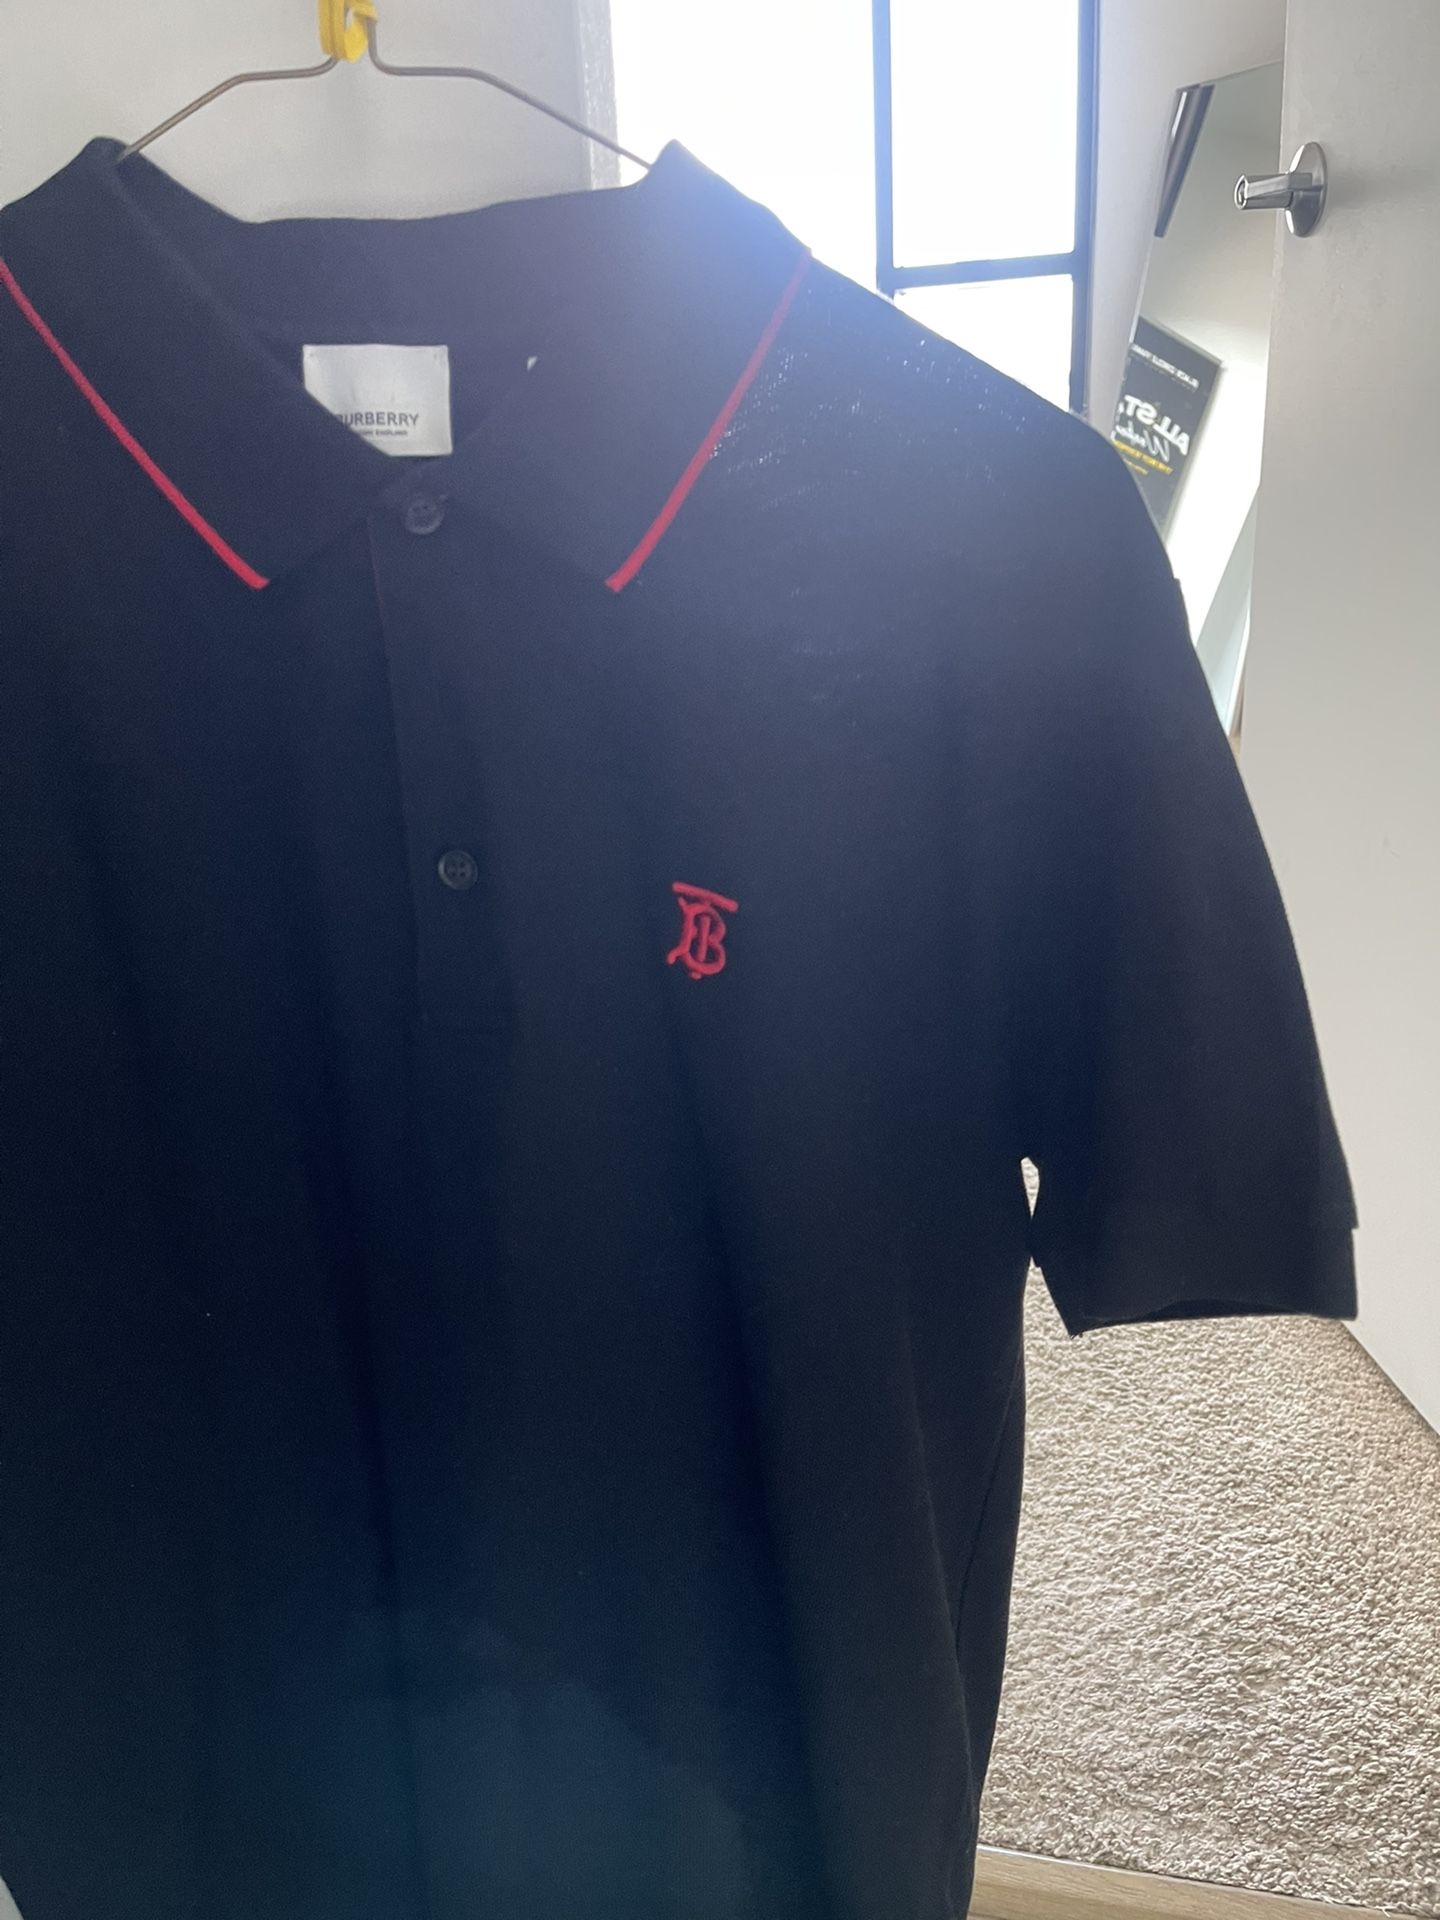 Burberry Men Polo Shirt Sz Small/Medium for Sale in Houston, TX - OfferUp